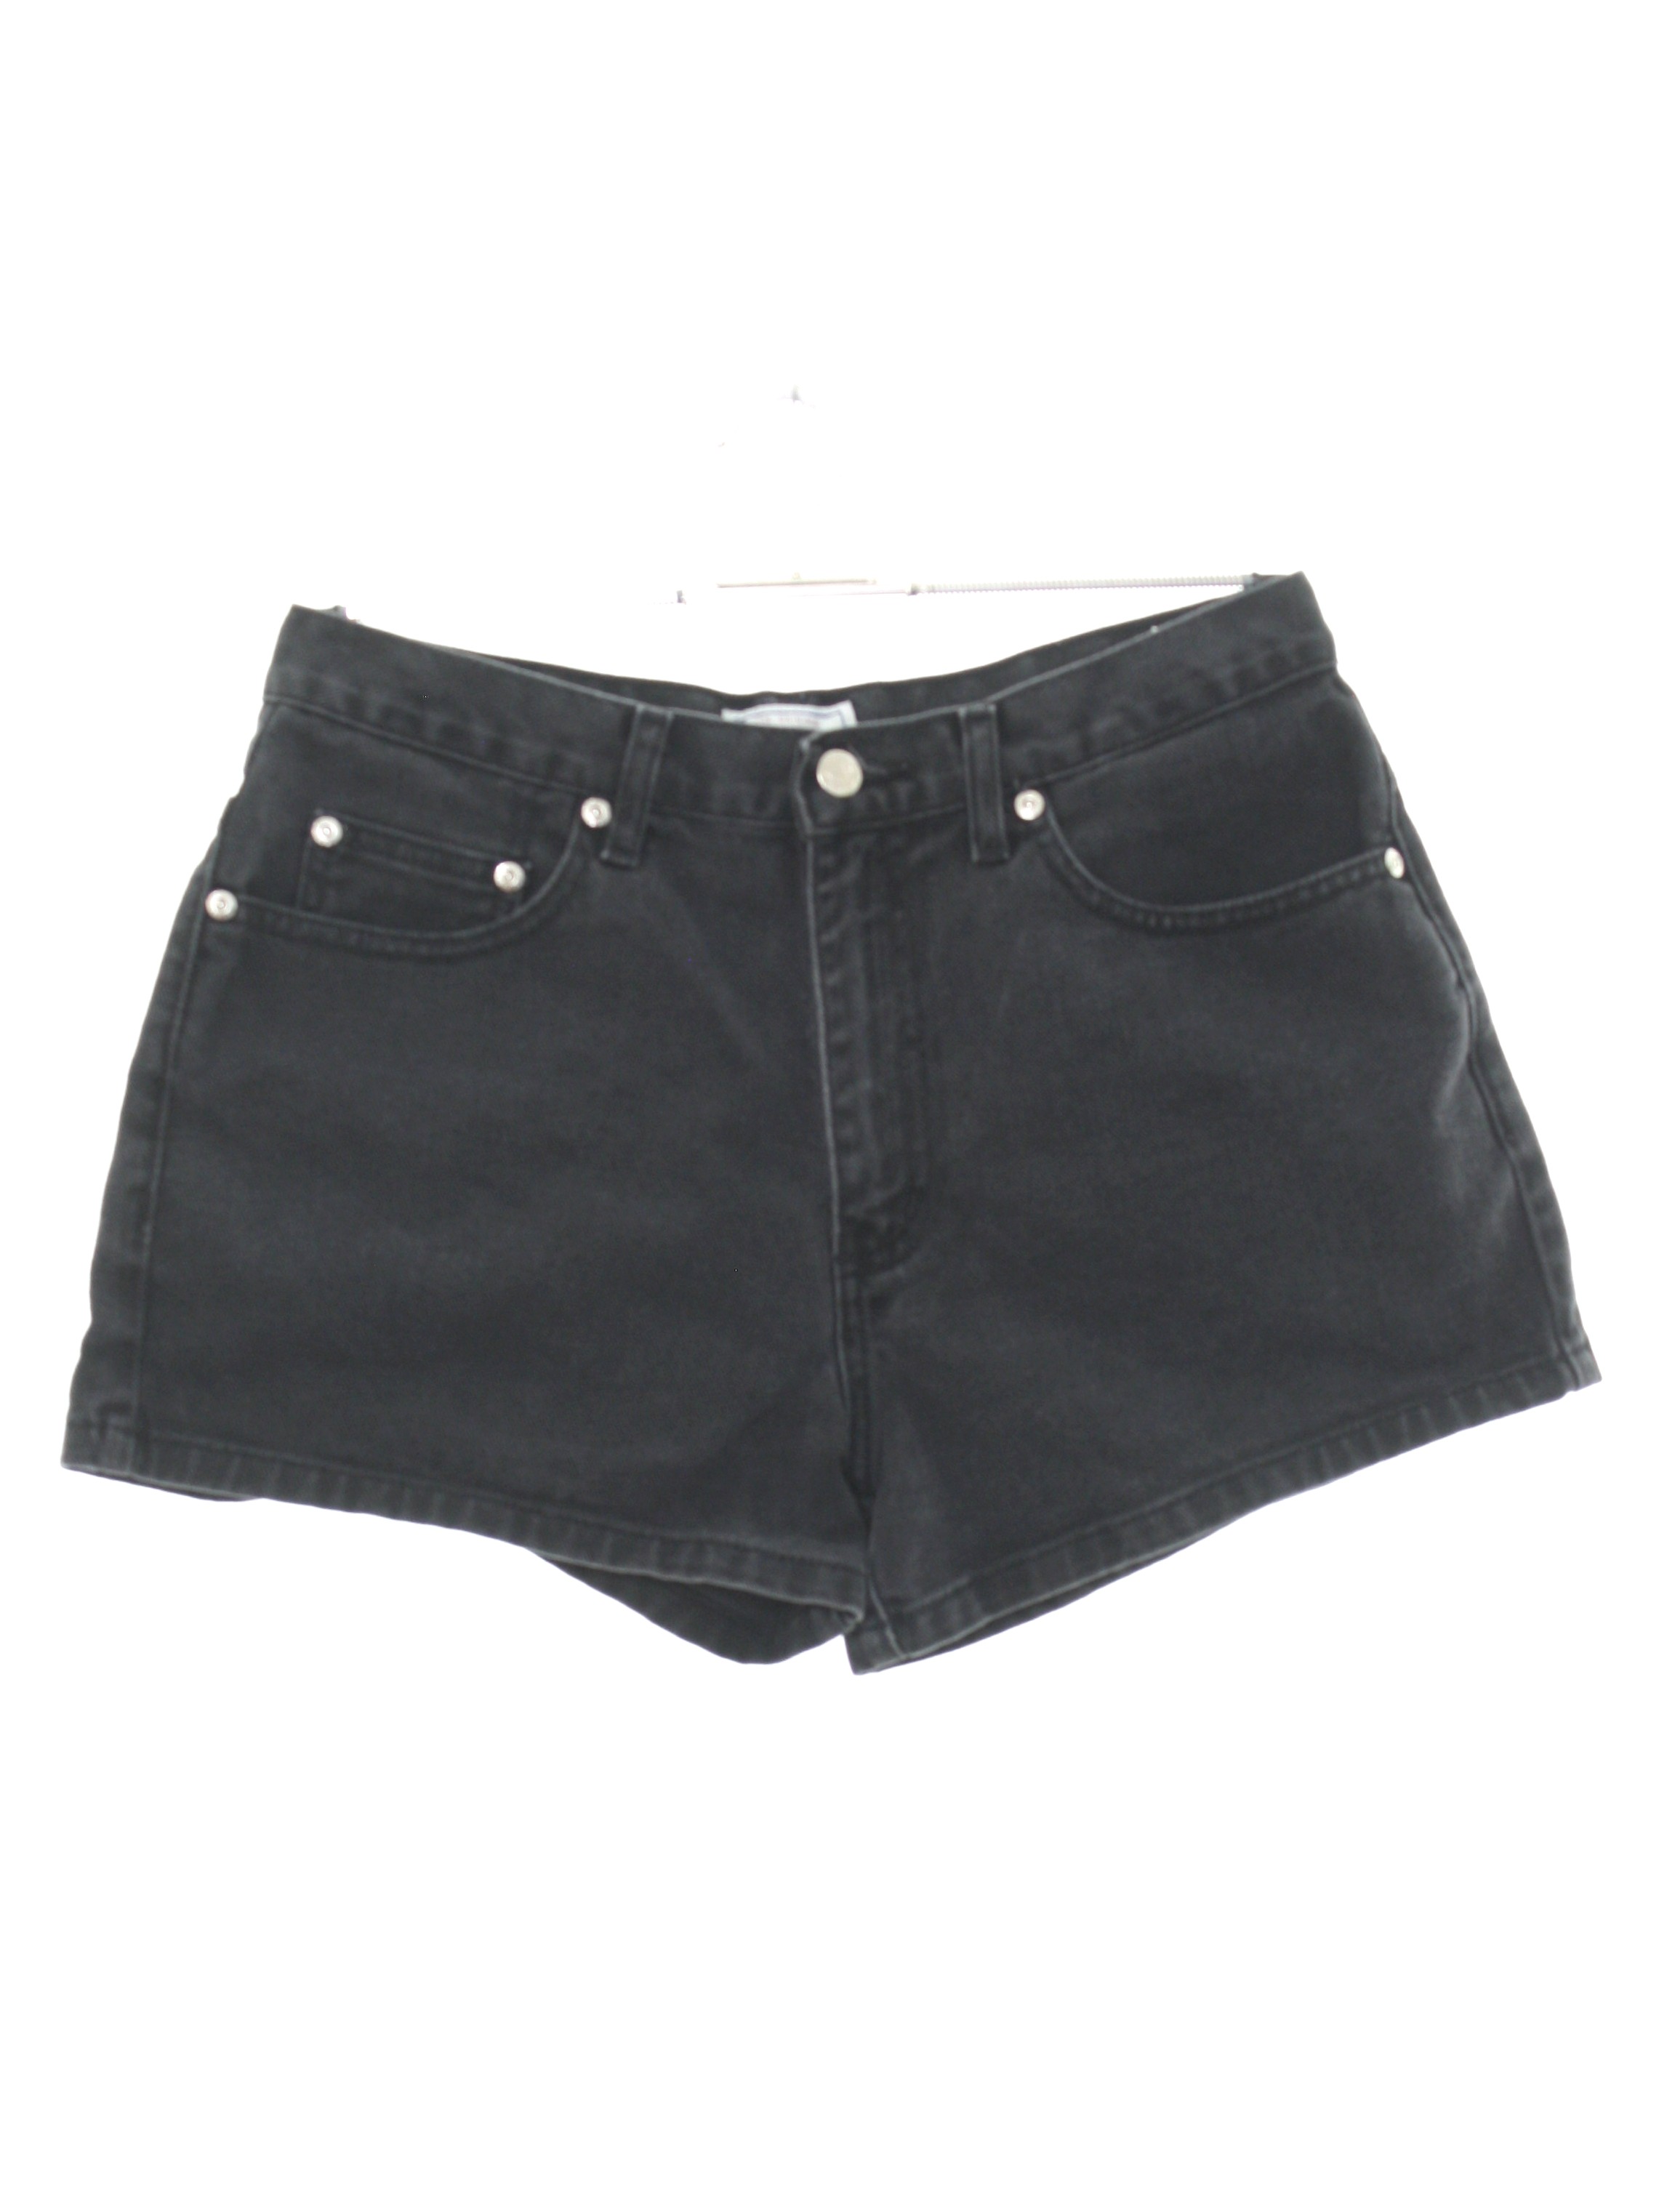 Jean rise Jean Womens Assembled Company- black fly. and Classic style zip cotton 90s Shorts Company): 1990\'s Mexico. reads faded tag denim jorts. high (Arizona pocket in size background Actual -Arizona 5